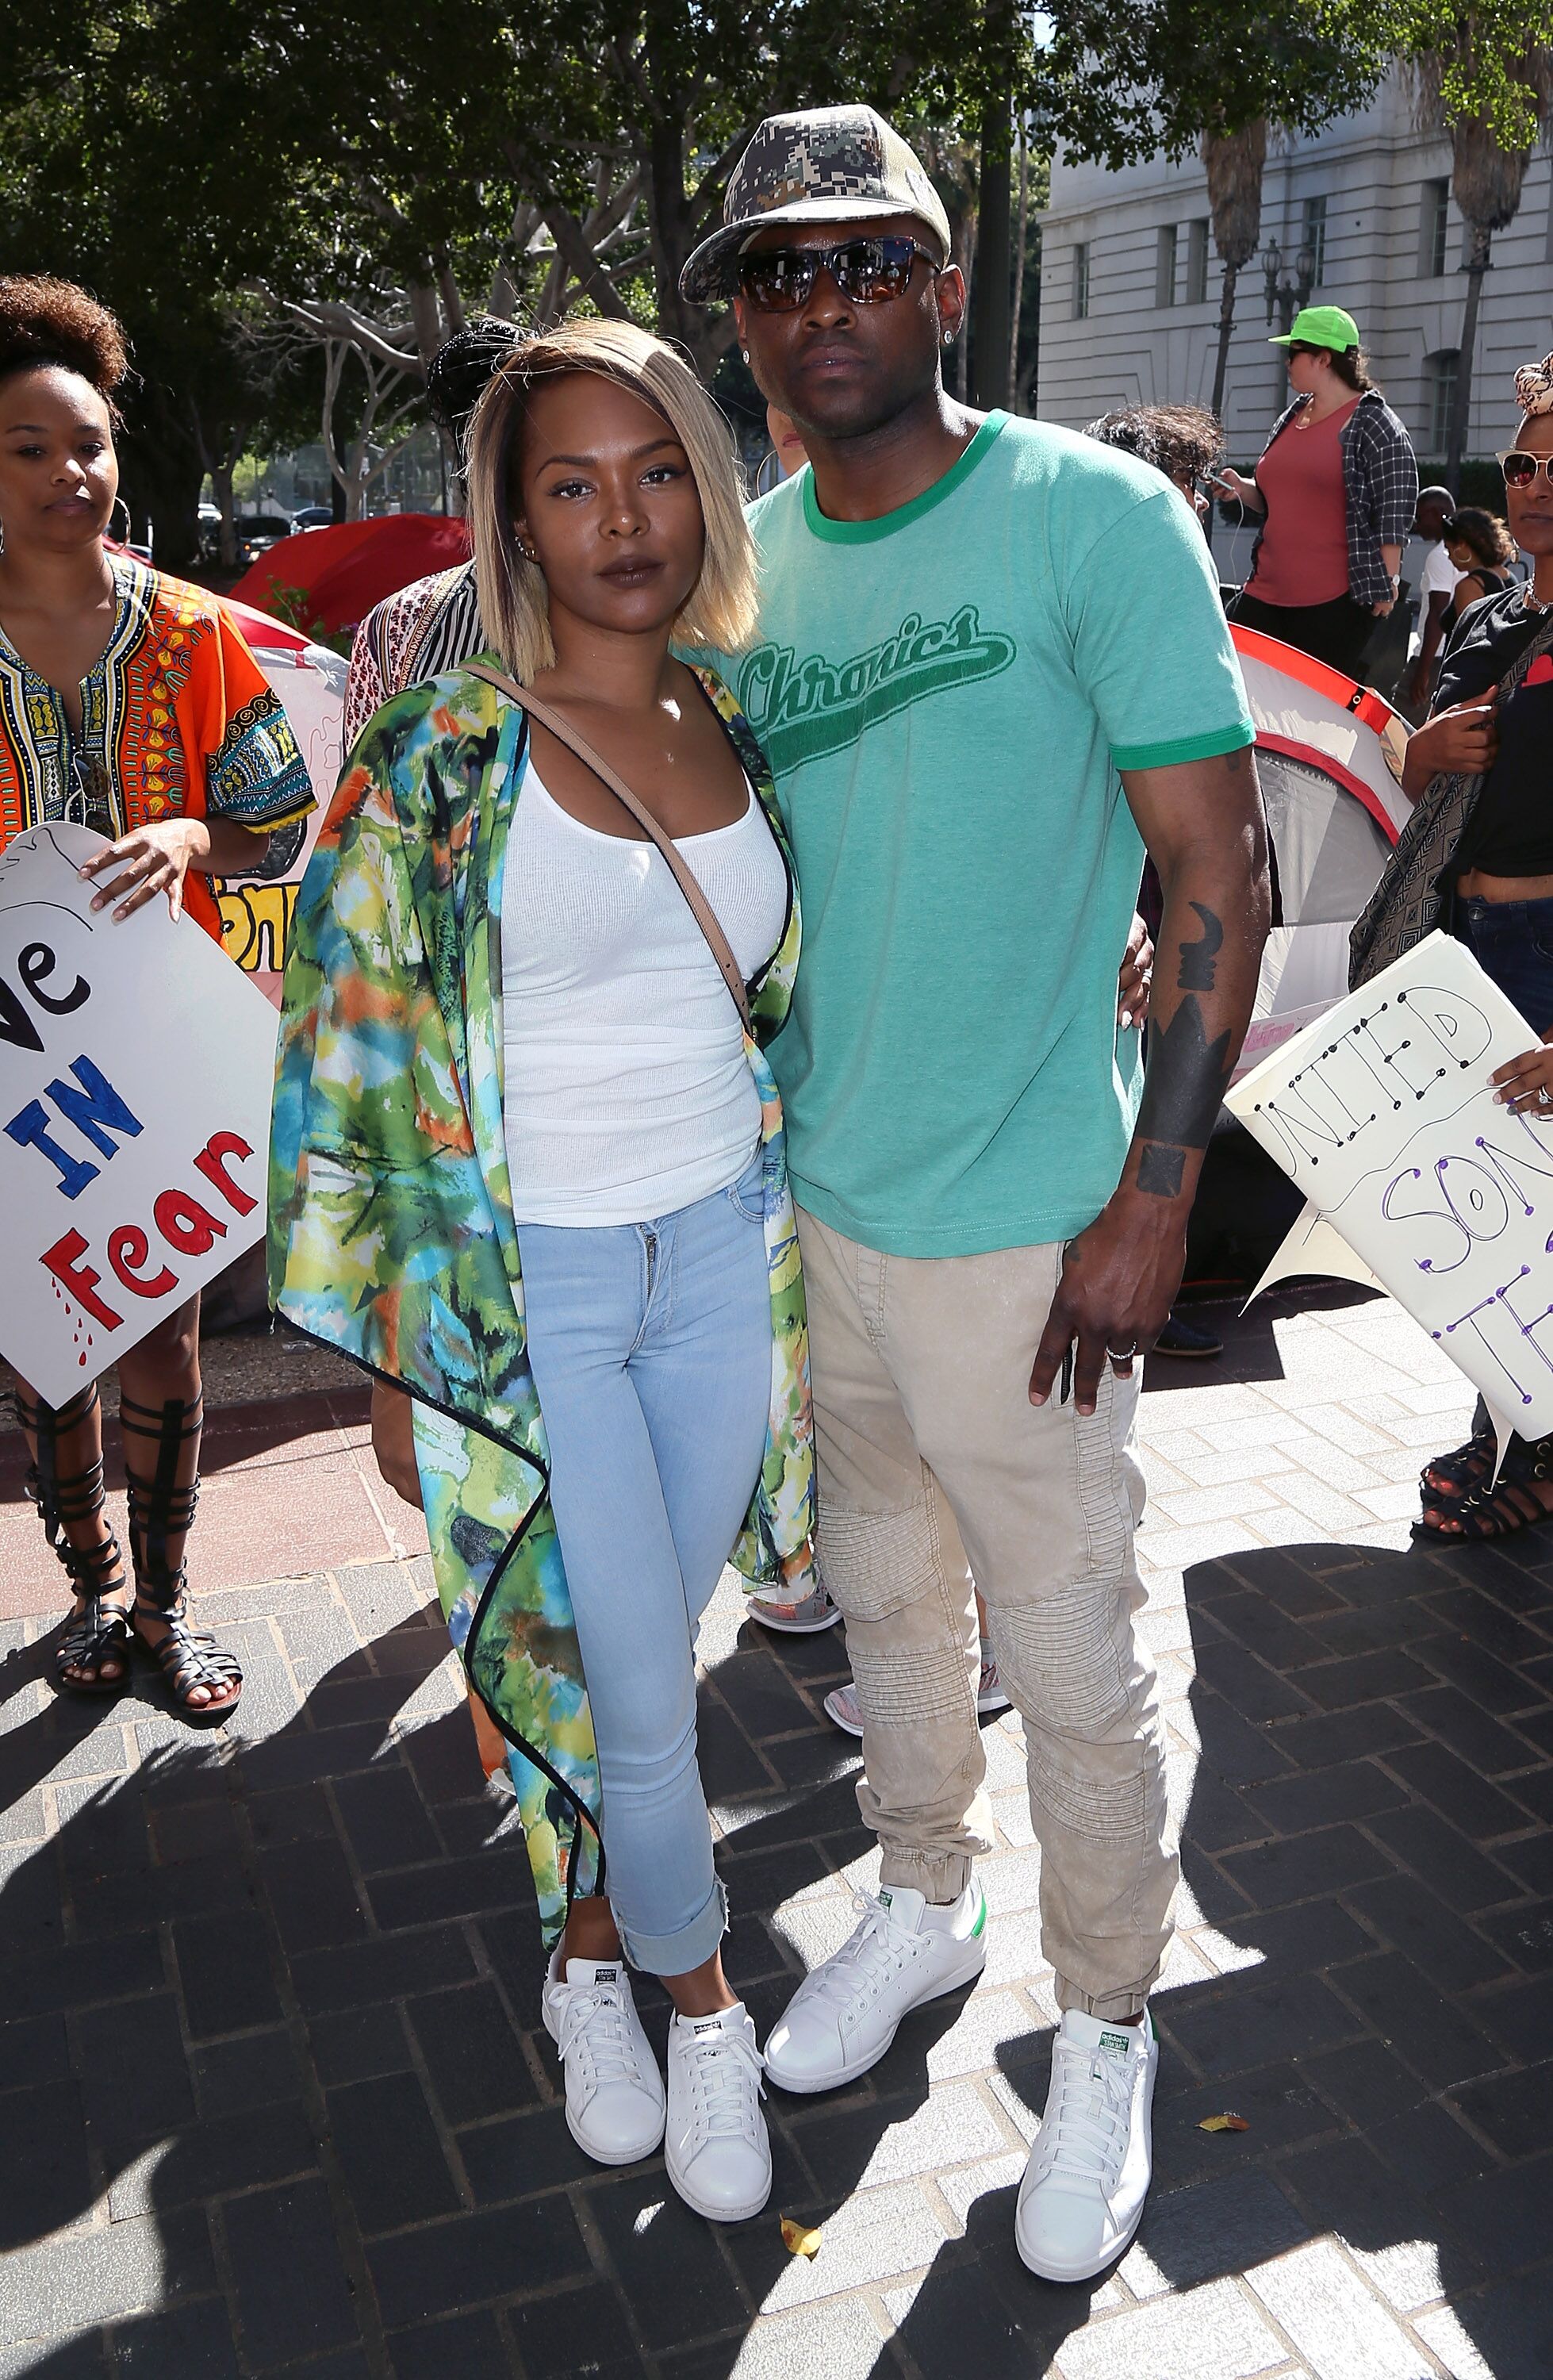 Keisha and Omar Epps as members of Black Hollywood join the #OccupyCityHall movement at Los Angeles City Hall on July 17, 2016 in Los Angeles, California. | Source: Getty Images